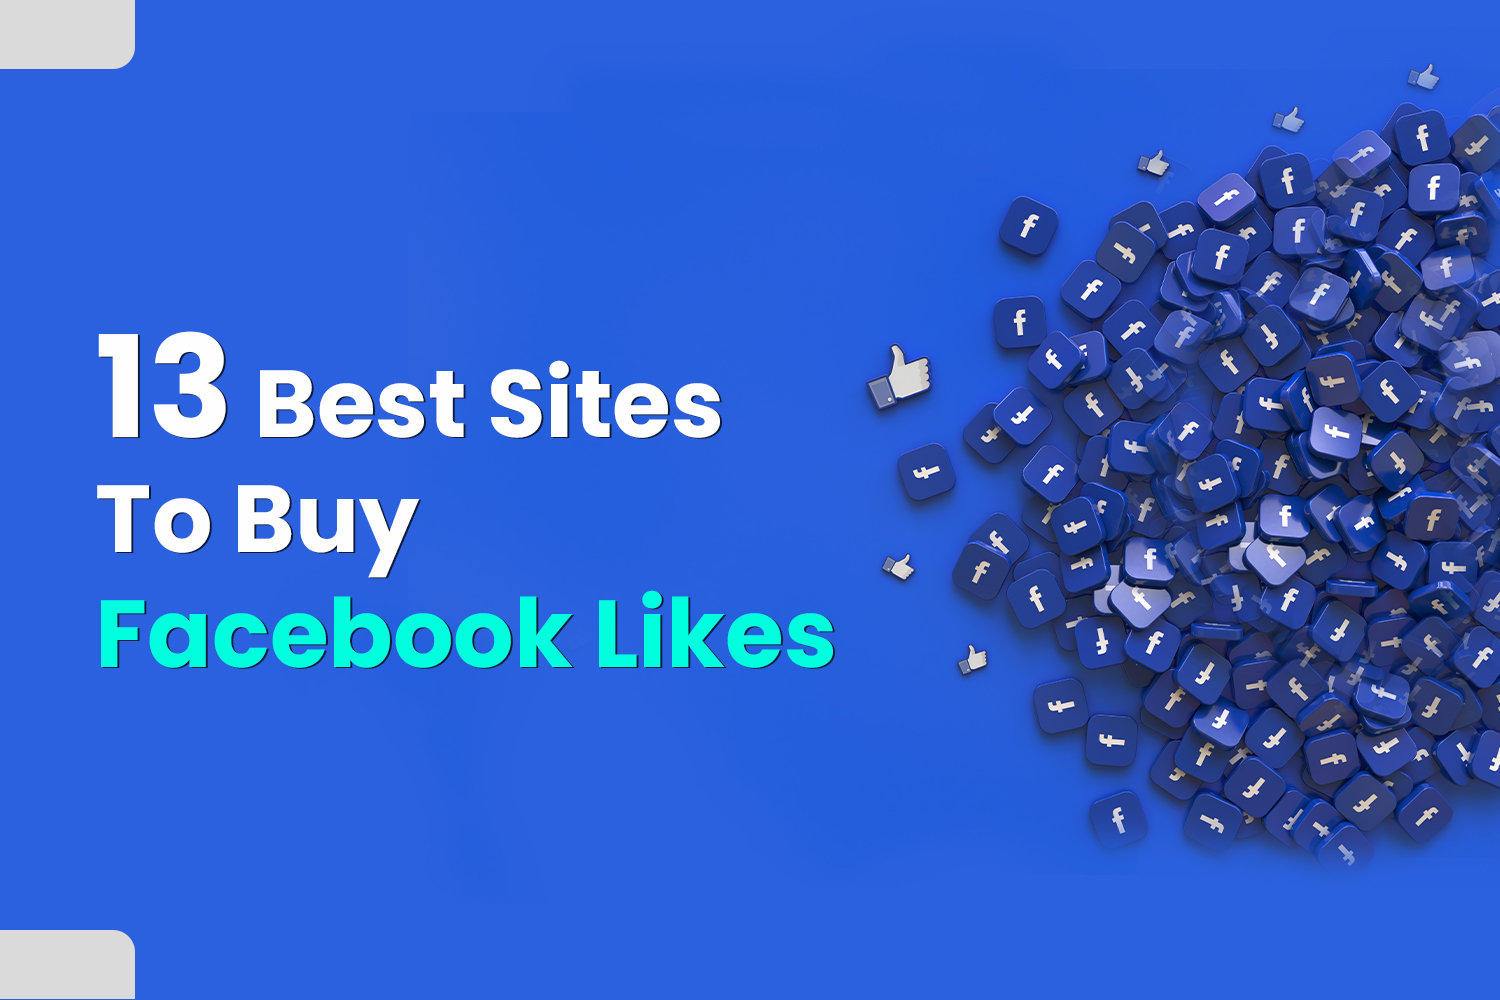 13 Best Sites To Buy Facebook Likes